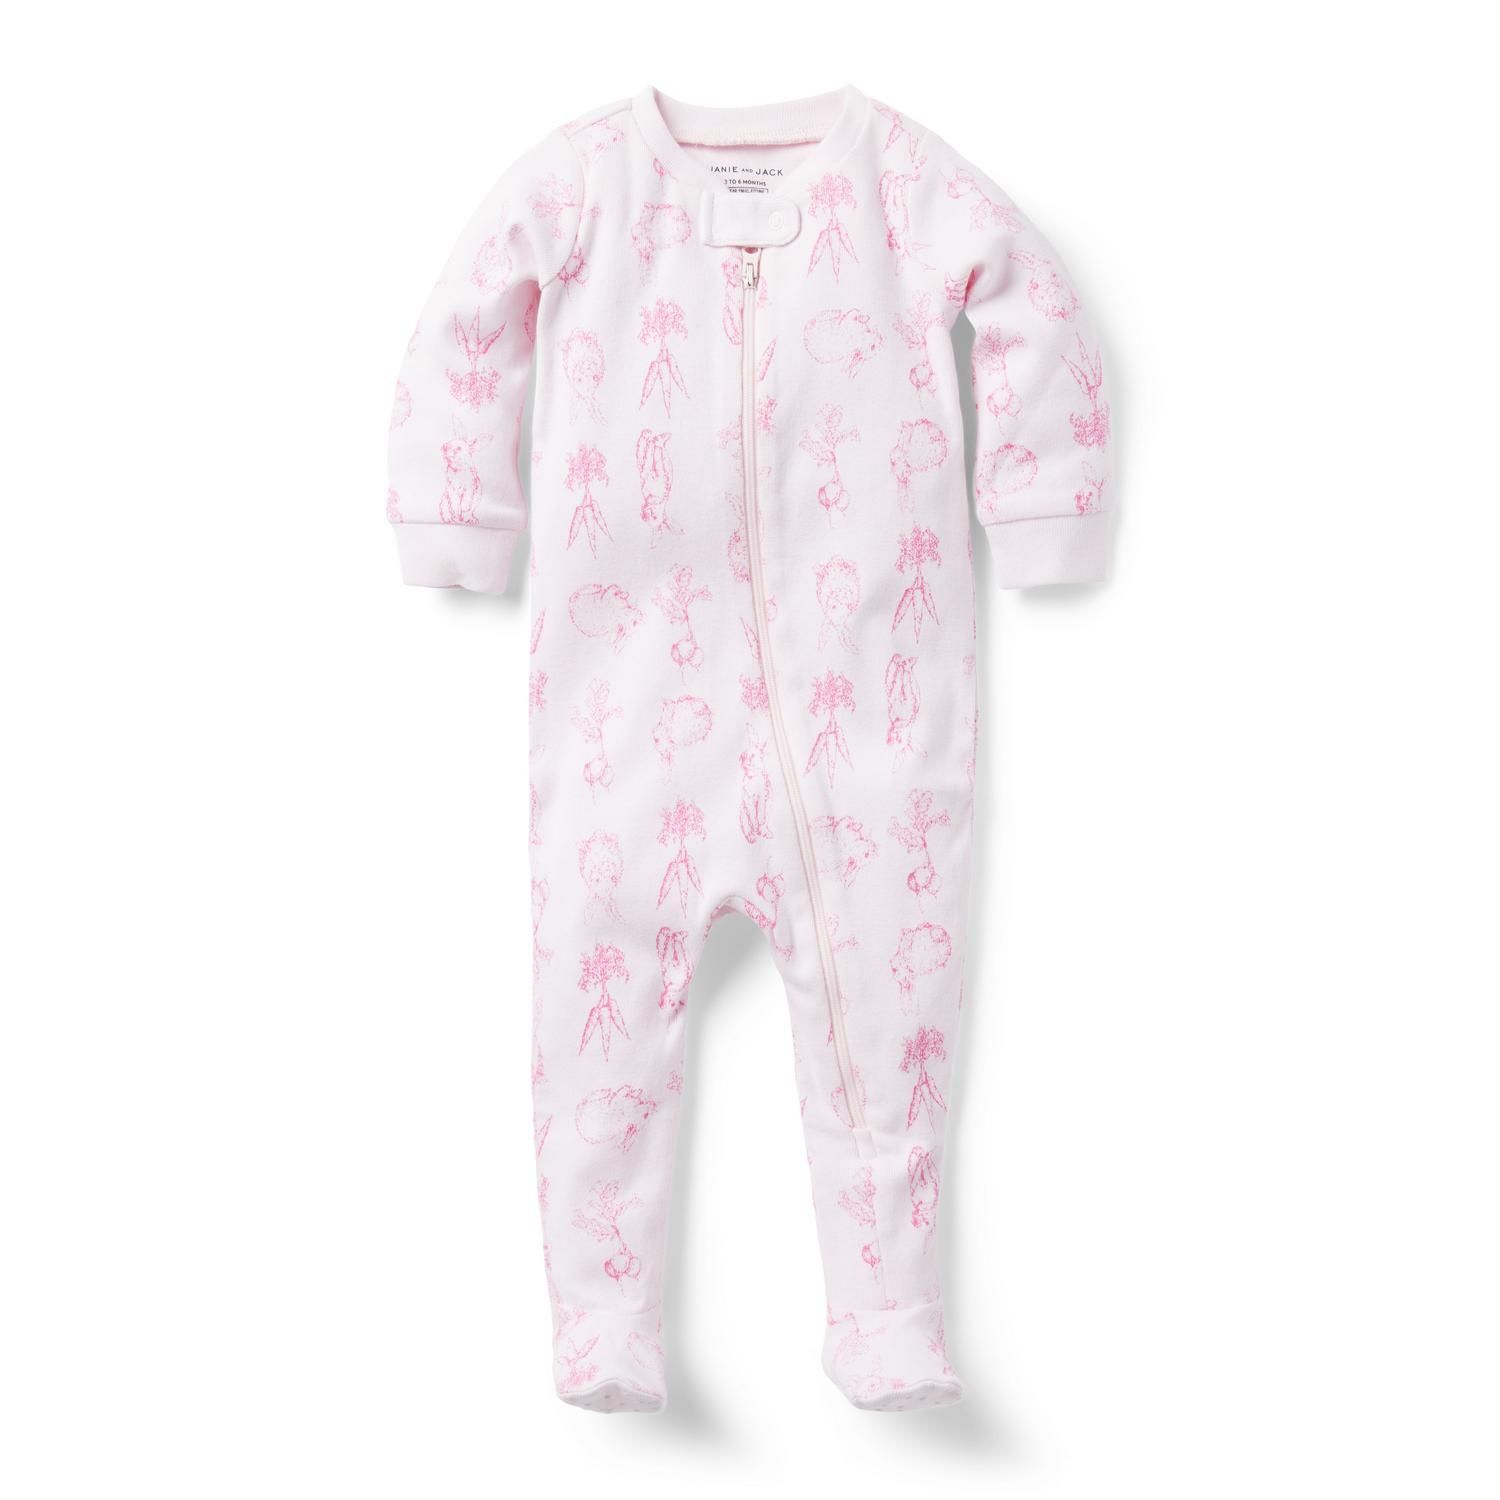 Baby Good Night Footed Pajama in Bunny Toile | Janie and Jack